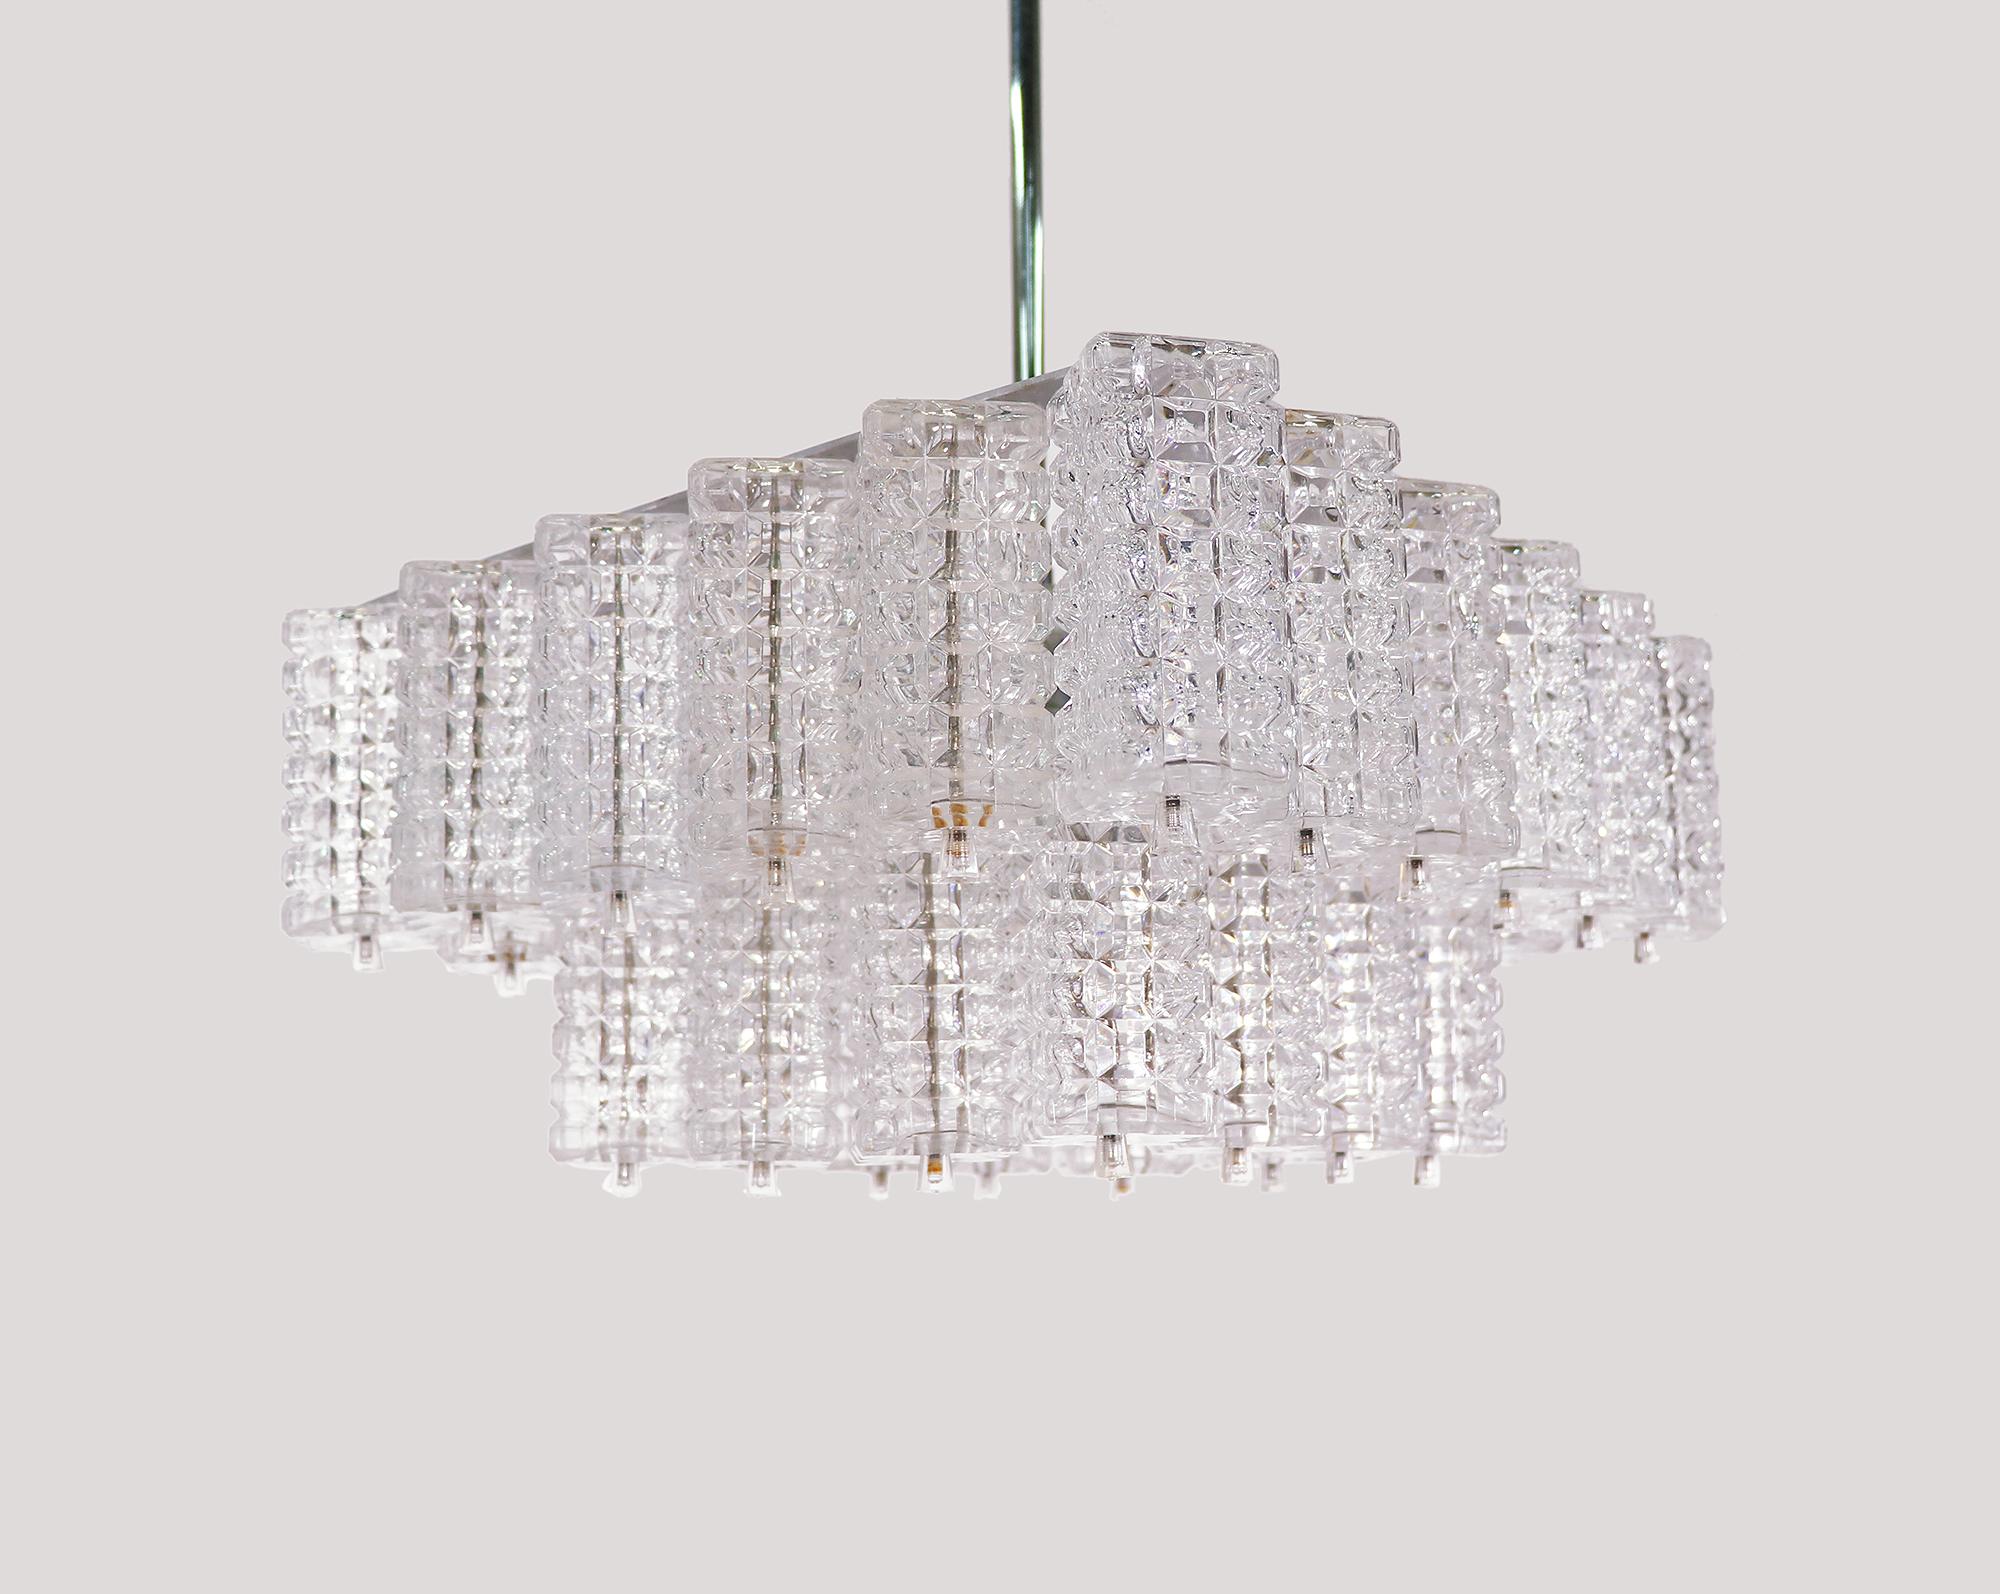 Elegant chandelier with faceted rectangular glass elements on a nickel plated frame with a chromed rod and canopy. Manufactured by Austrolux, Vienna, Austria in the 1960s. 

Measures: w 16